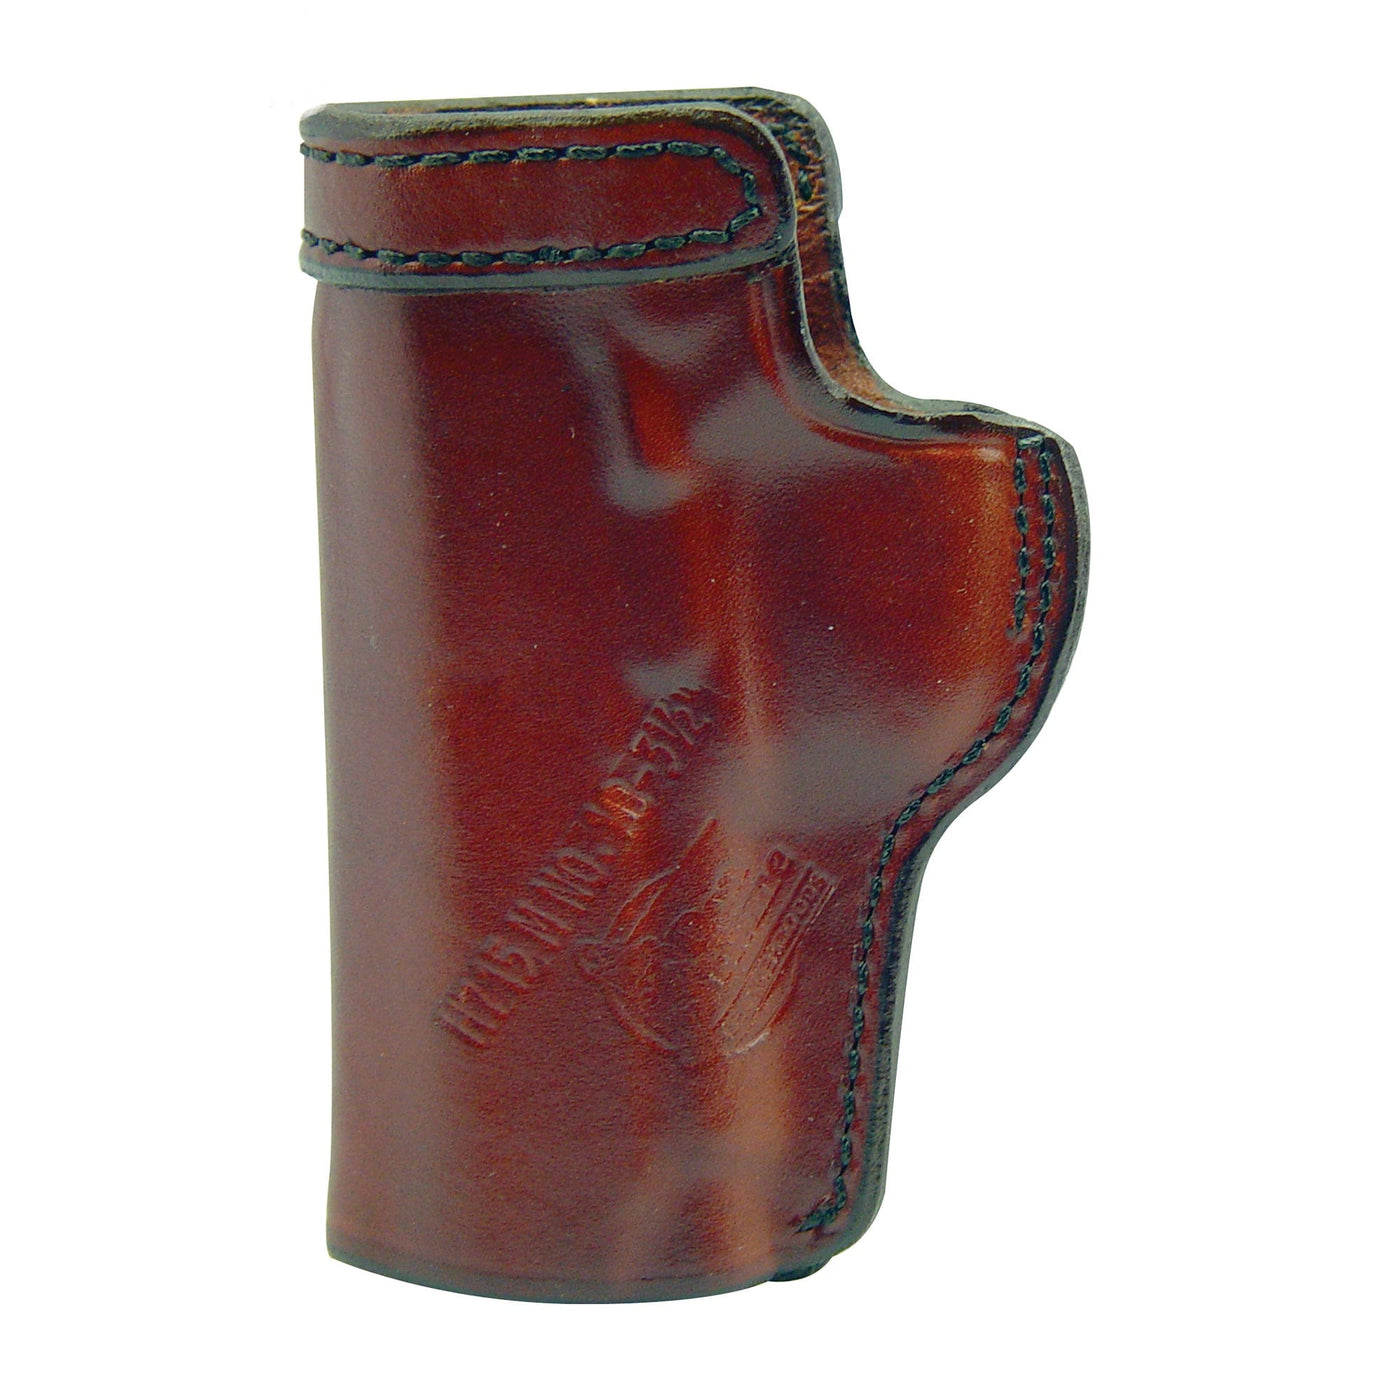 Don Hume D Hume H715-m 10-3.5 1911 Ofcr Br Rh Holsters